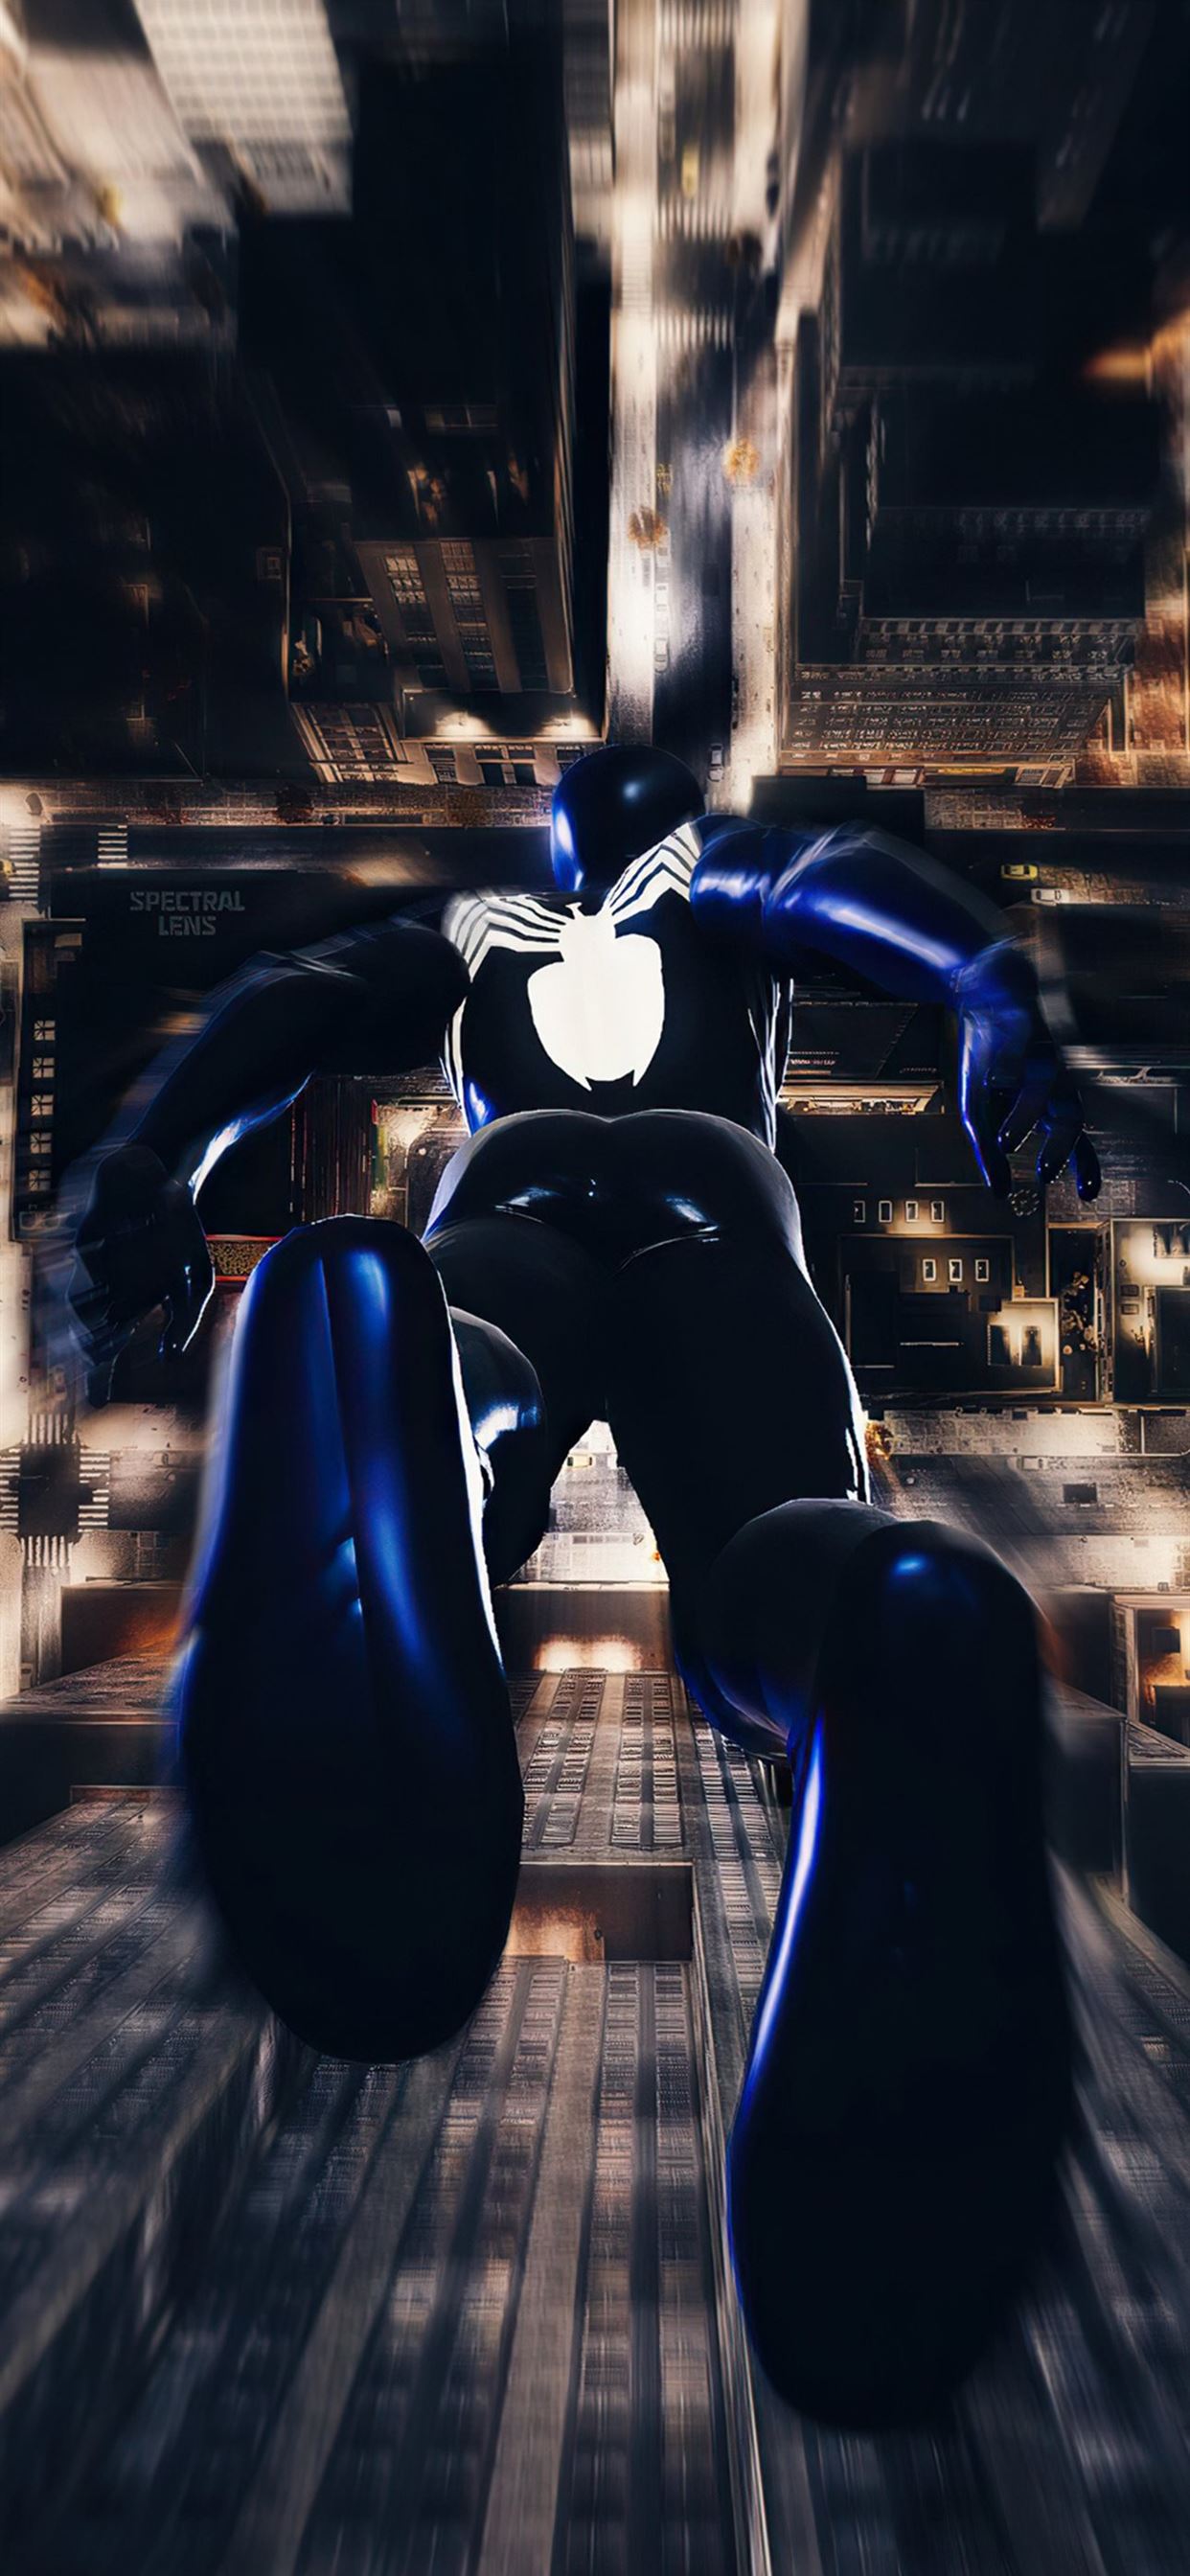 Spider on suit Wallpaper 4k Ultra HD ID:8738